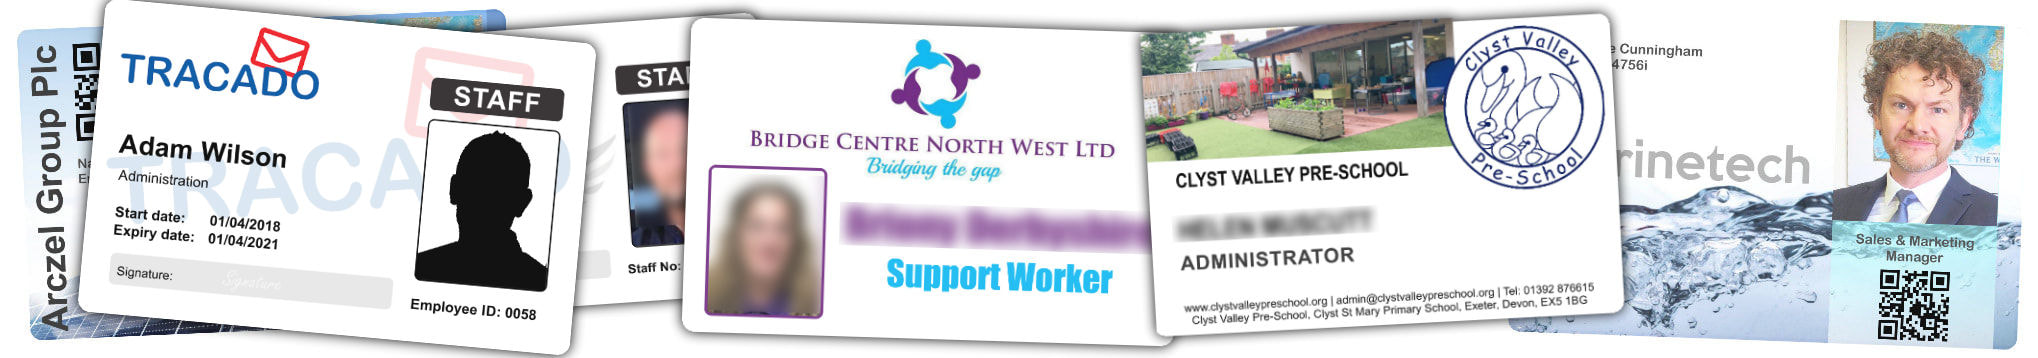 Chesterfield examples of staff photo ID cards | samples of employee Identity card printing | Workers ID cards printed in 